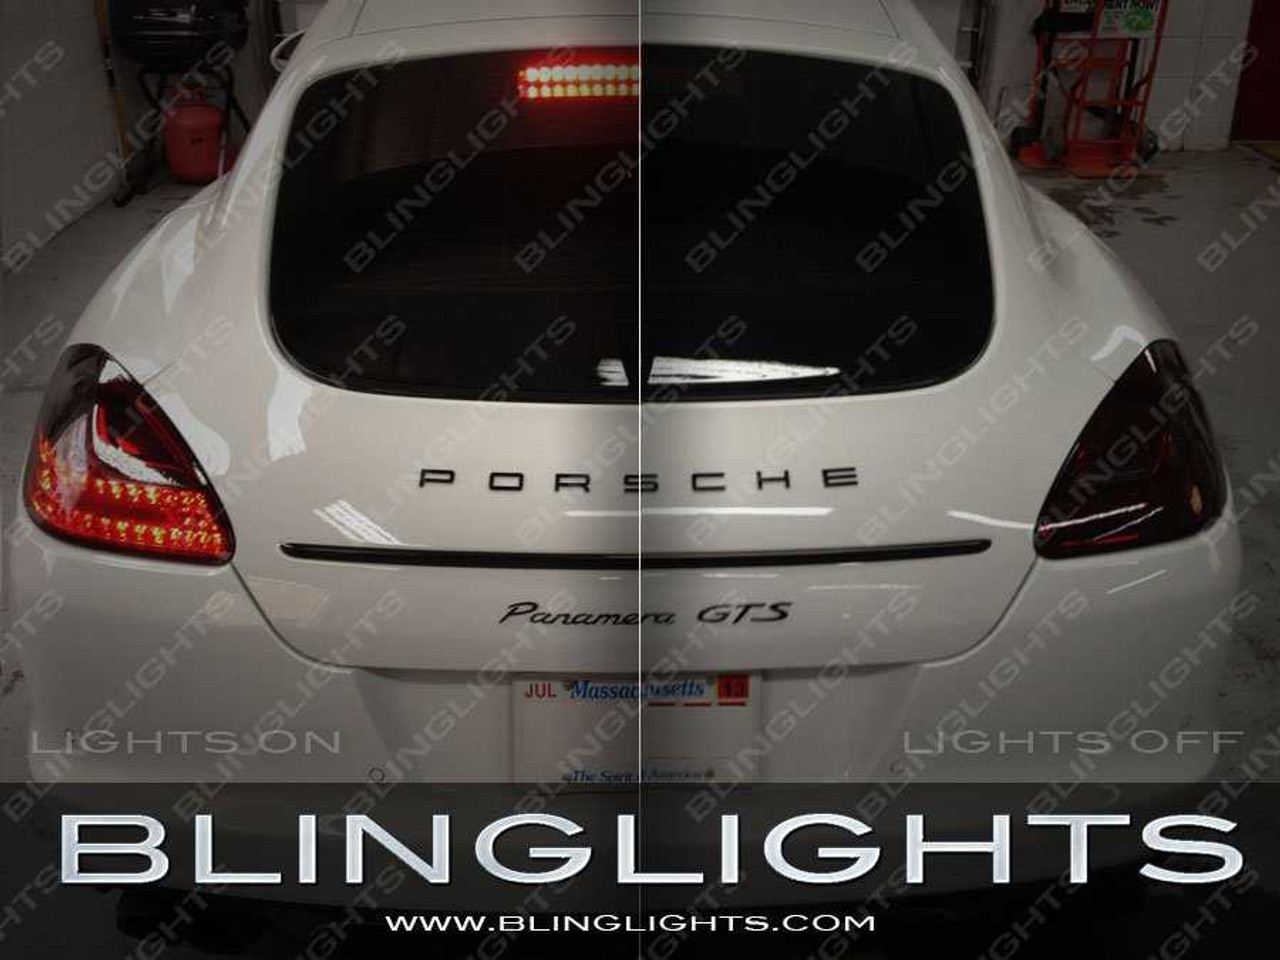 BlingLights Brand Tinted Taillamp Protective Film Covers for Chevrolet Caprice